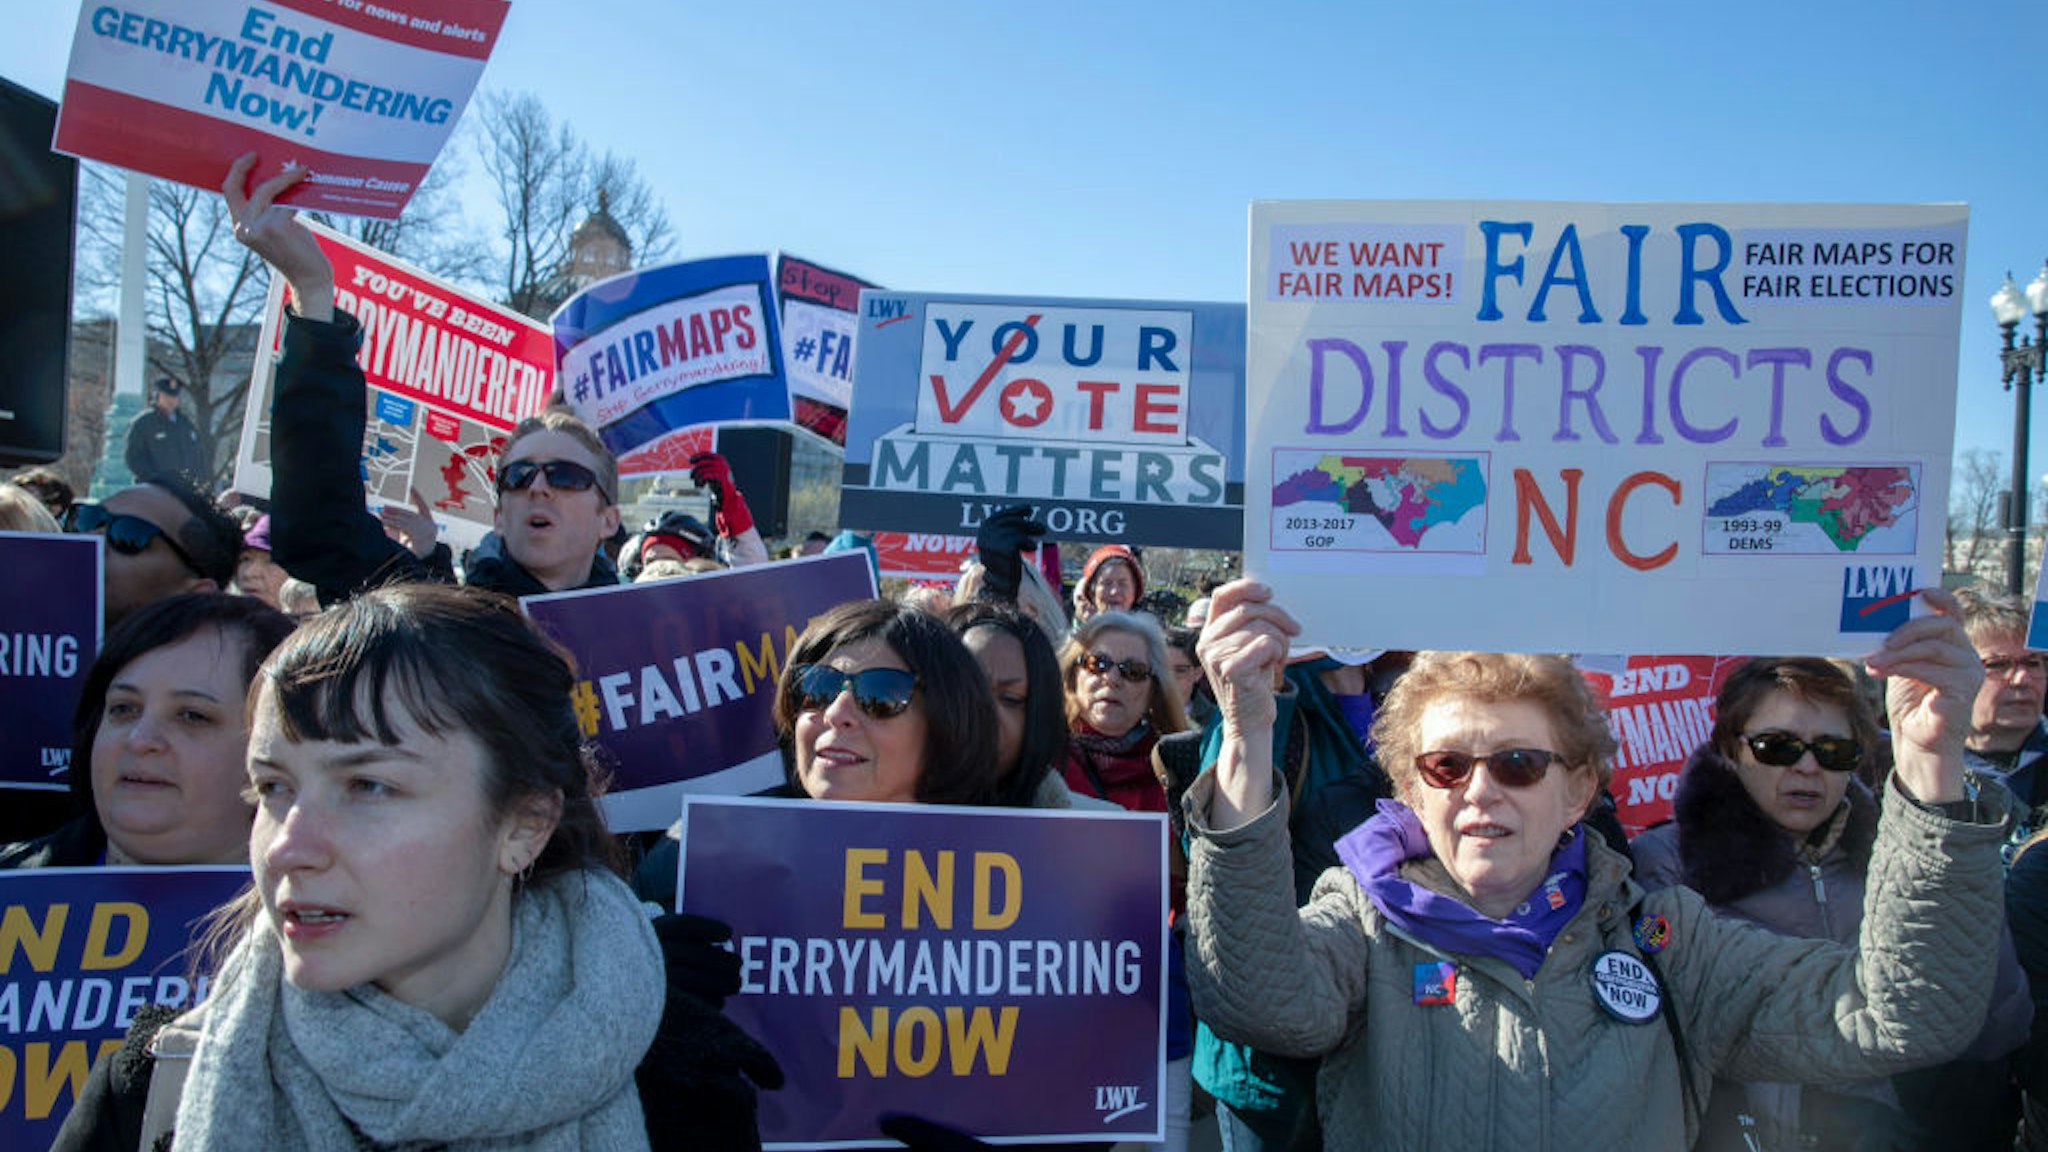 WASHINGTON, DC - MARCH 26: Protesters attends a rally for "Fair Maps" on March 26, 2019 in Washington, DC. The rally was part of the Supreme Court hearings in landmark redistricting cases out of North Carolina and Maryland